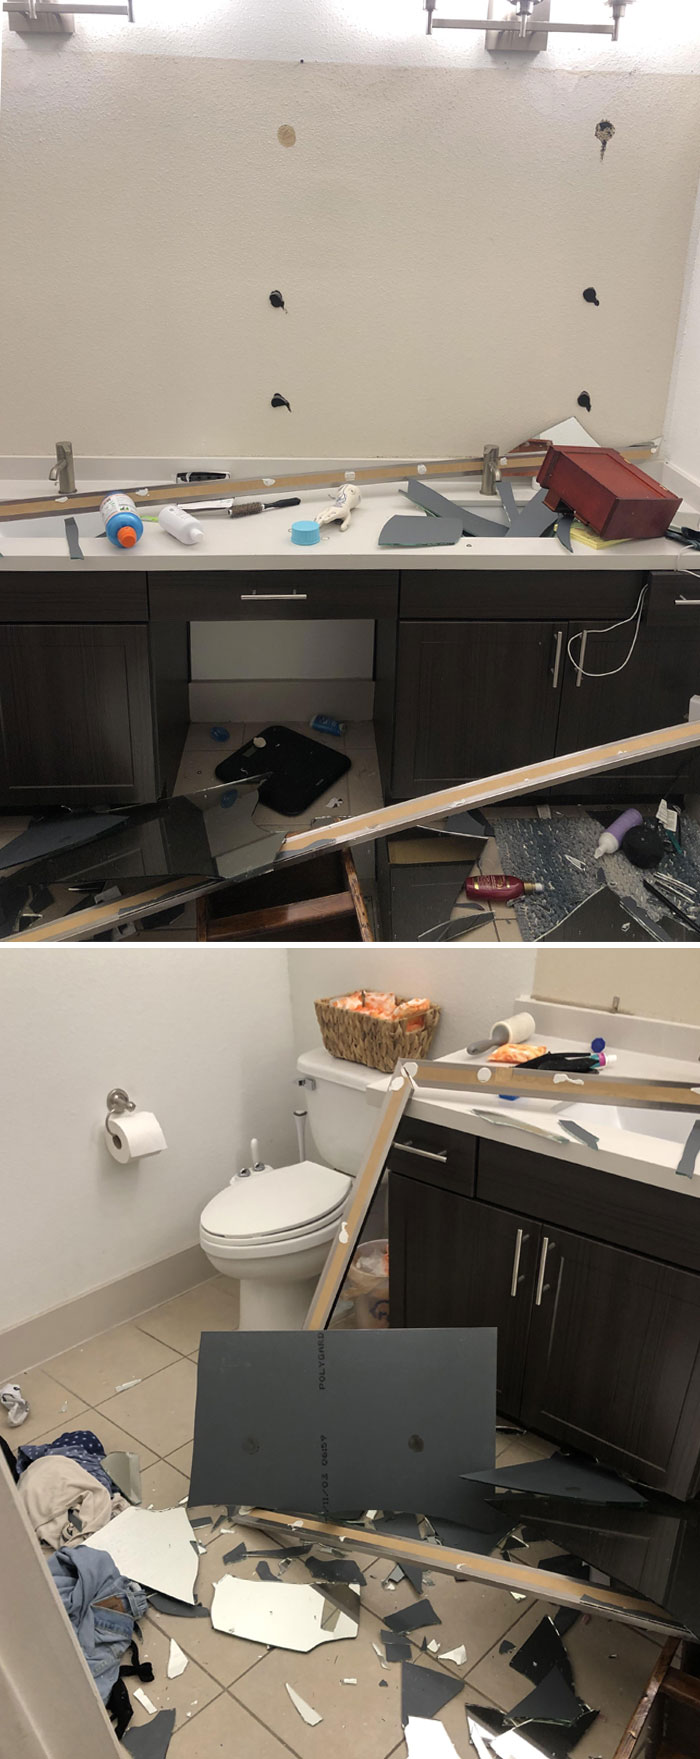 Heard A Crash In The Bathroom - The Mirror Literally Fell Off The Wall Randomly. Maintenance Said We Aren’t The First Unit This Has Happened To